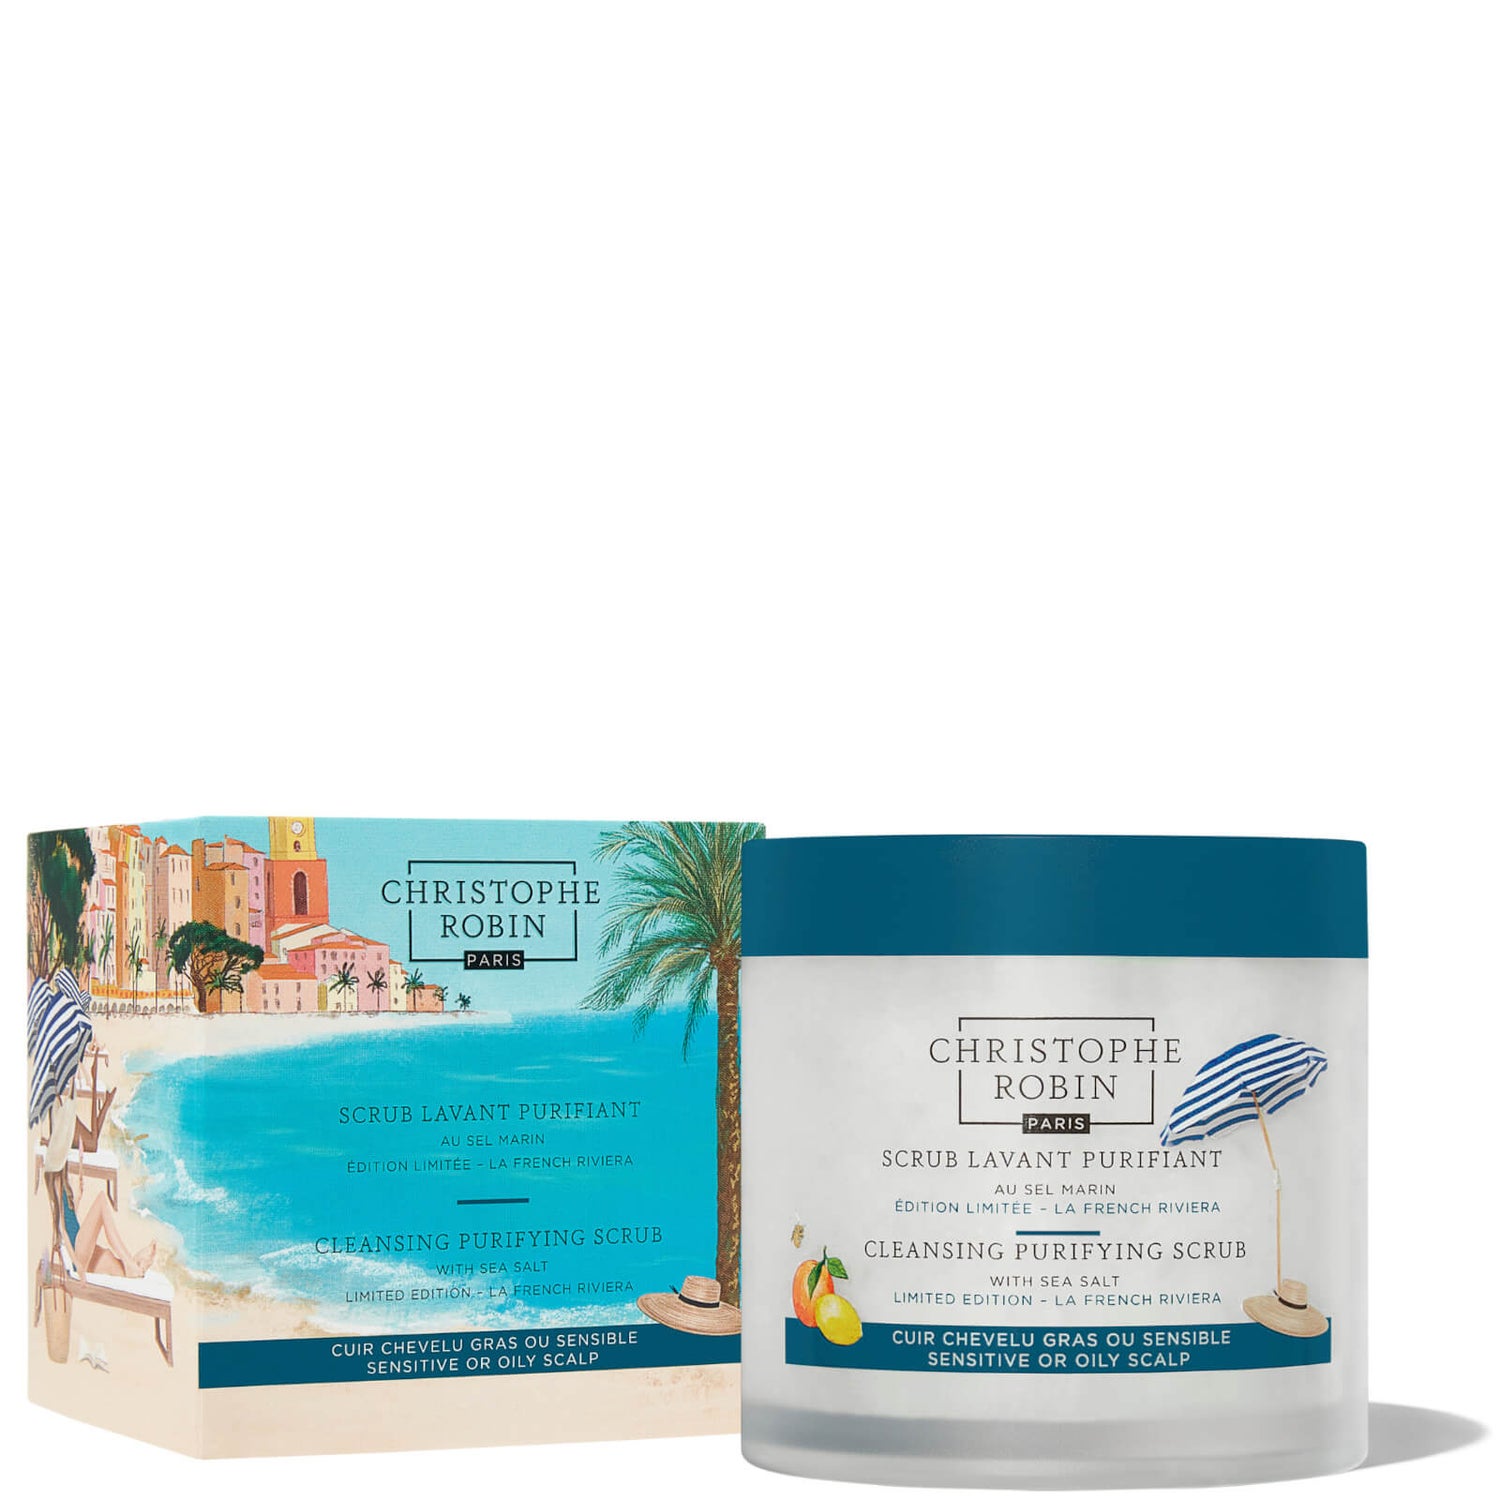 Christophe Robin Limited Edition French Riviera Cleansing Purifying Scrub with Sea Salt 250ml